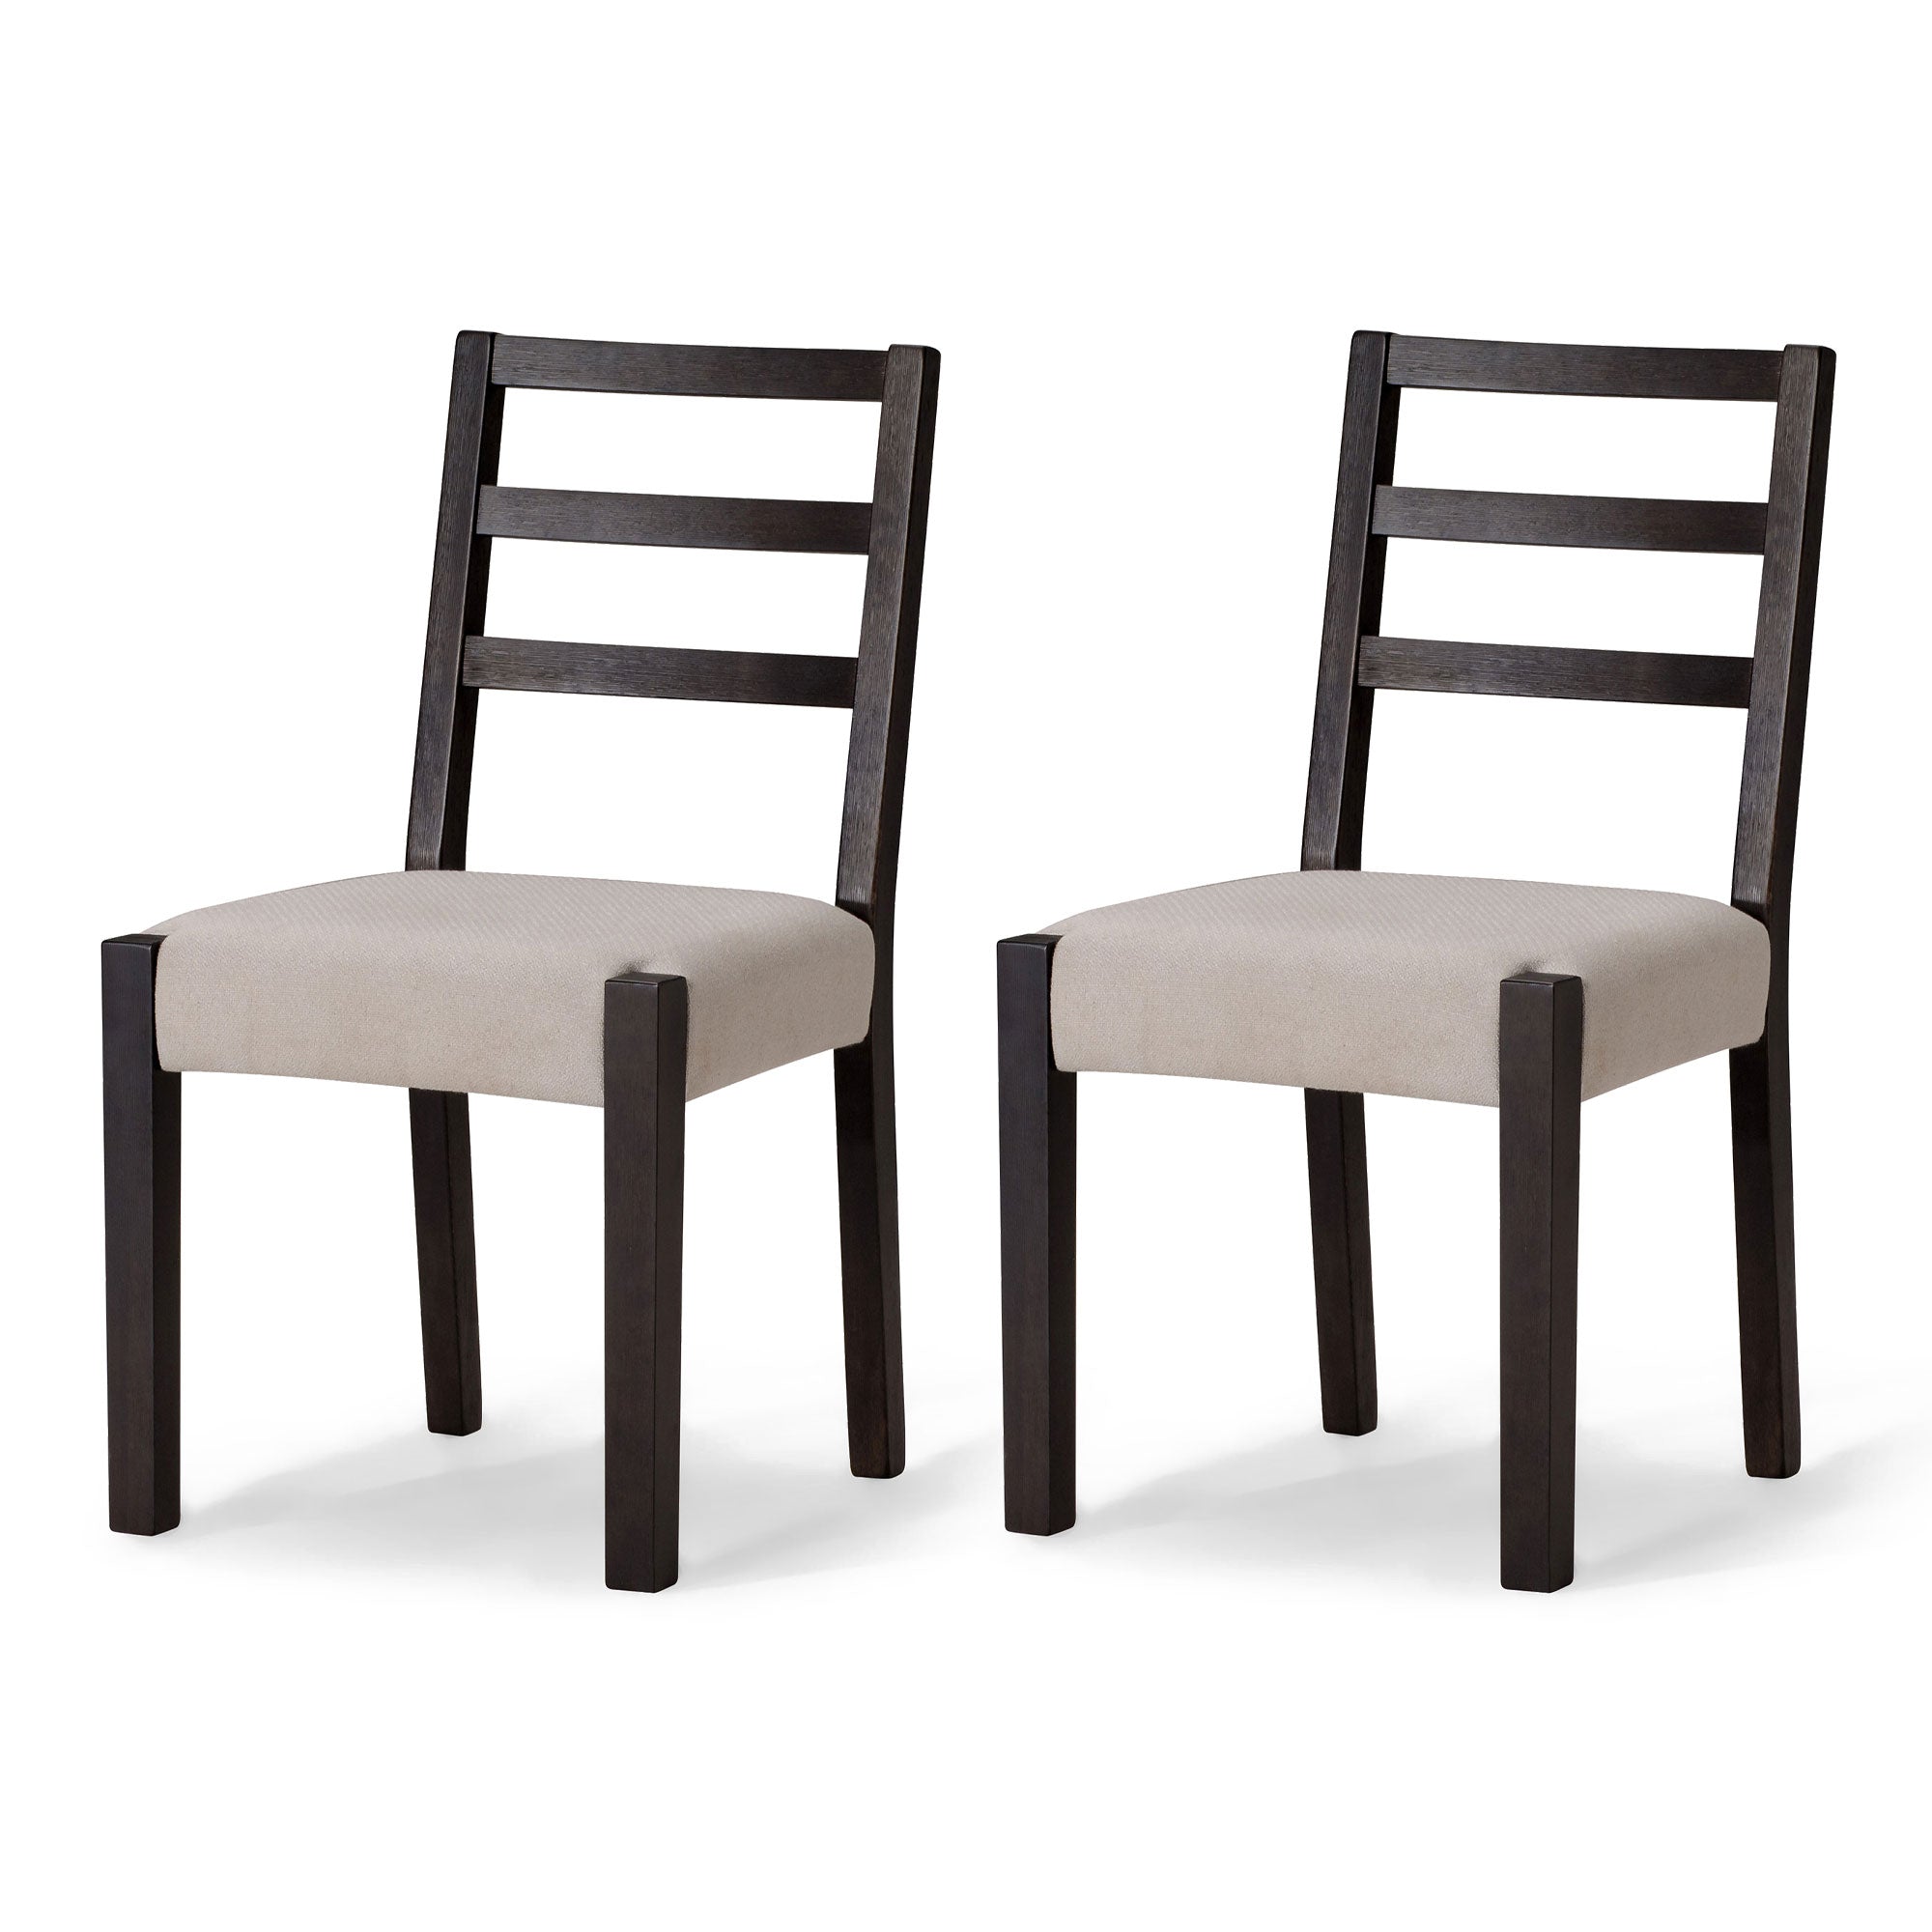 Willow Organic Wooden Dining Chair in Weathered Black Finish with Dove Weave Fabric Upholstery, Set of 2 in Dining Furniture by Maven Lane